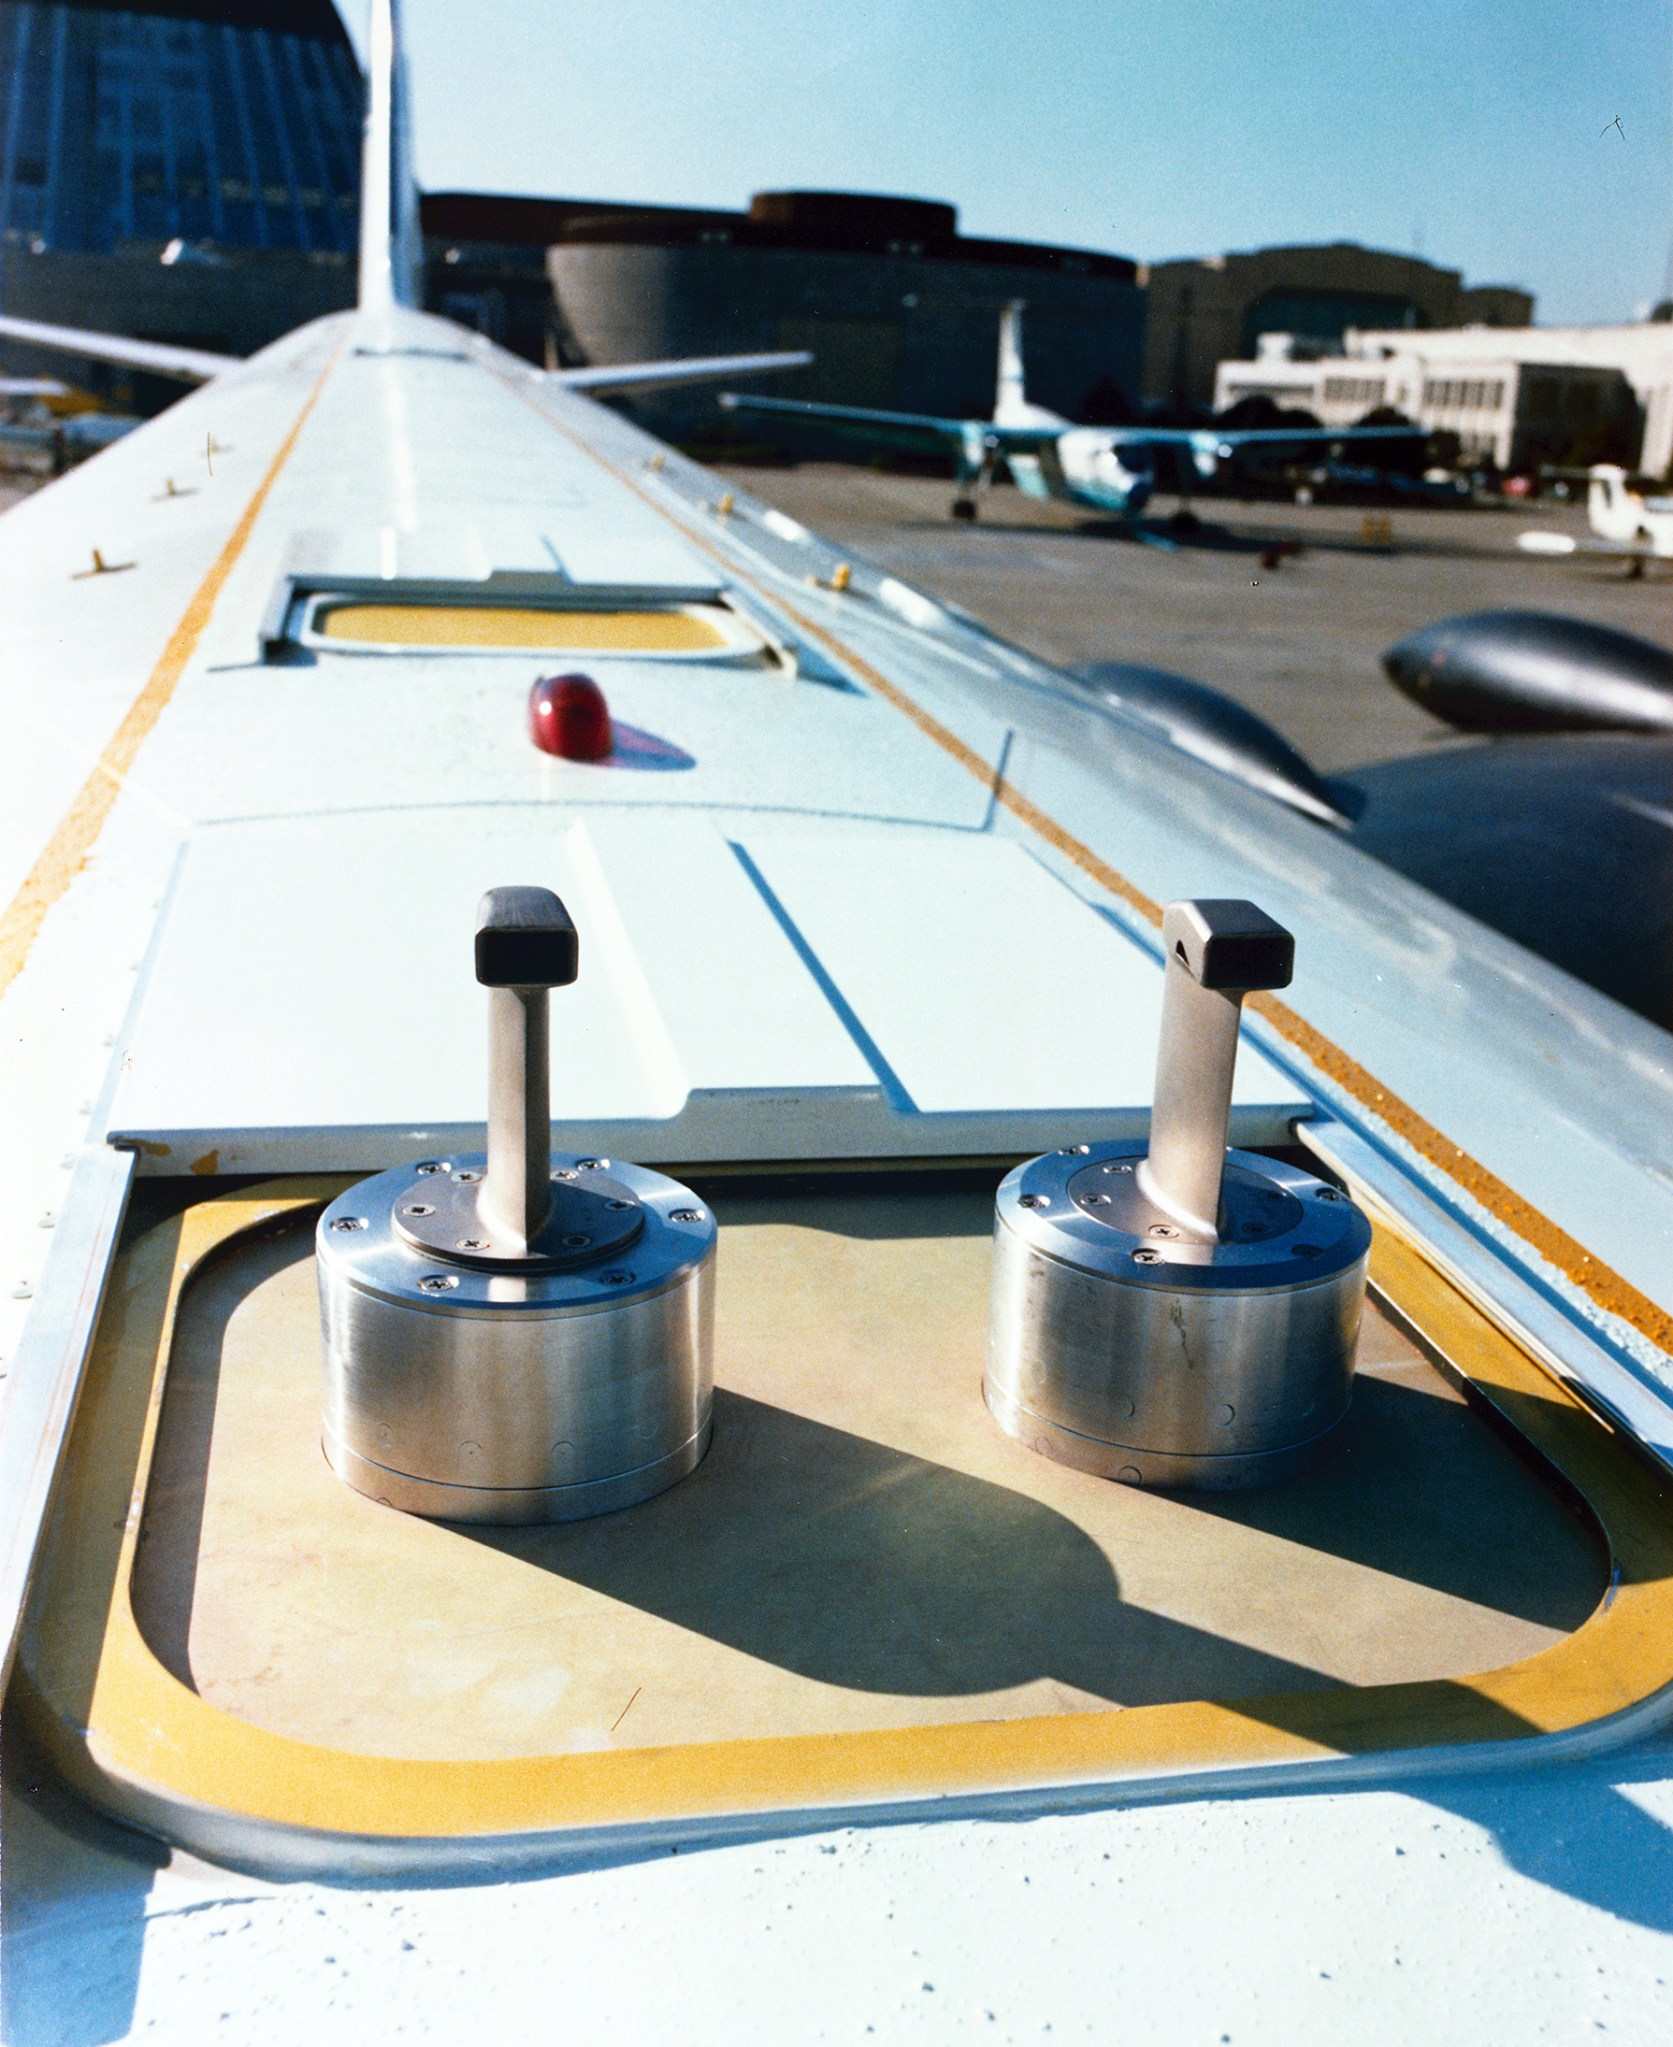 Metal probes are mounted on top of an airliner.